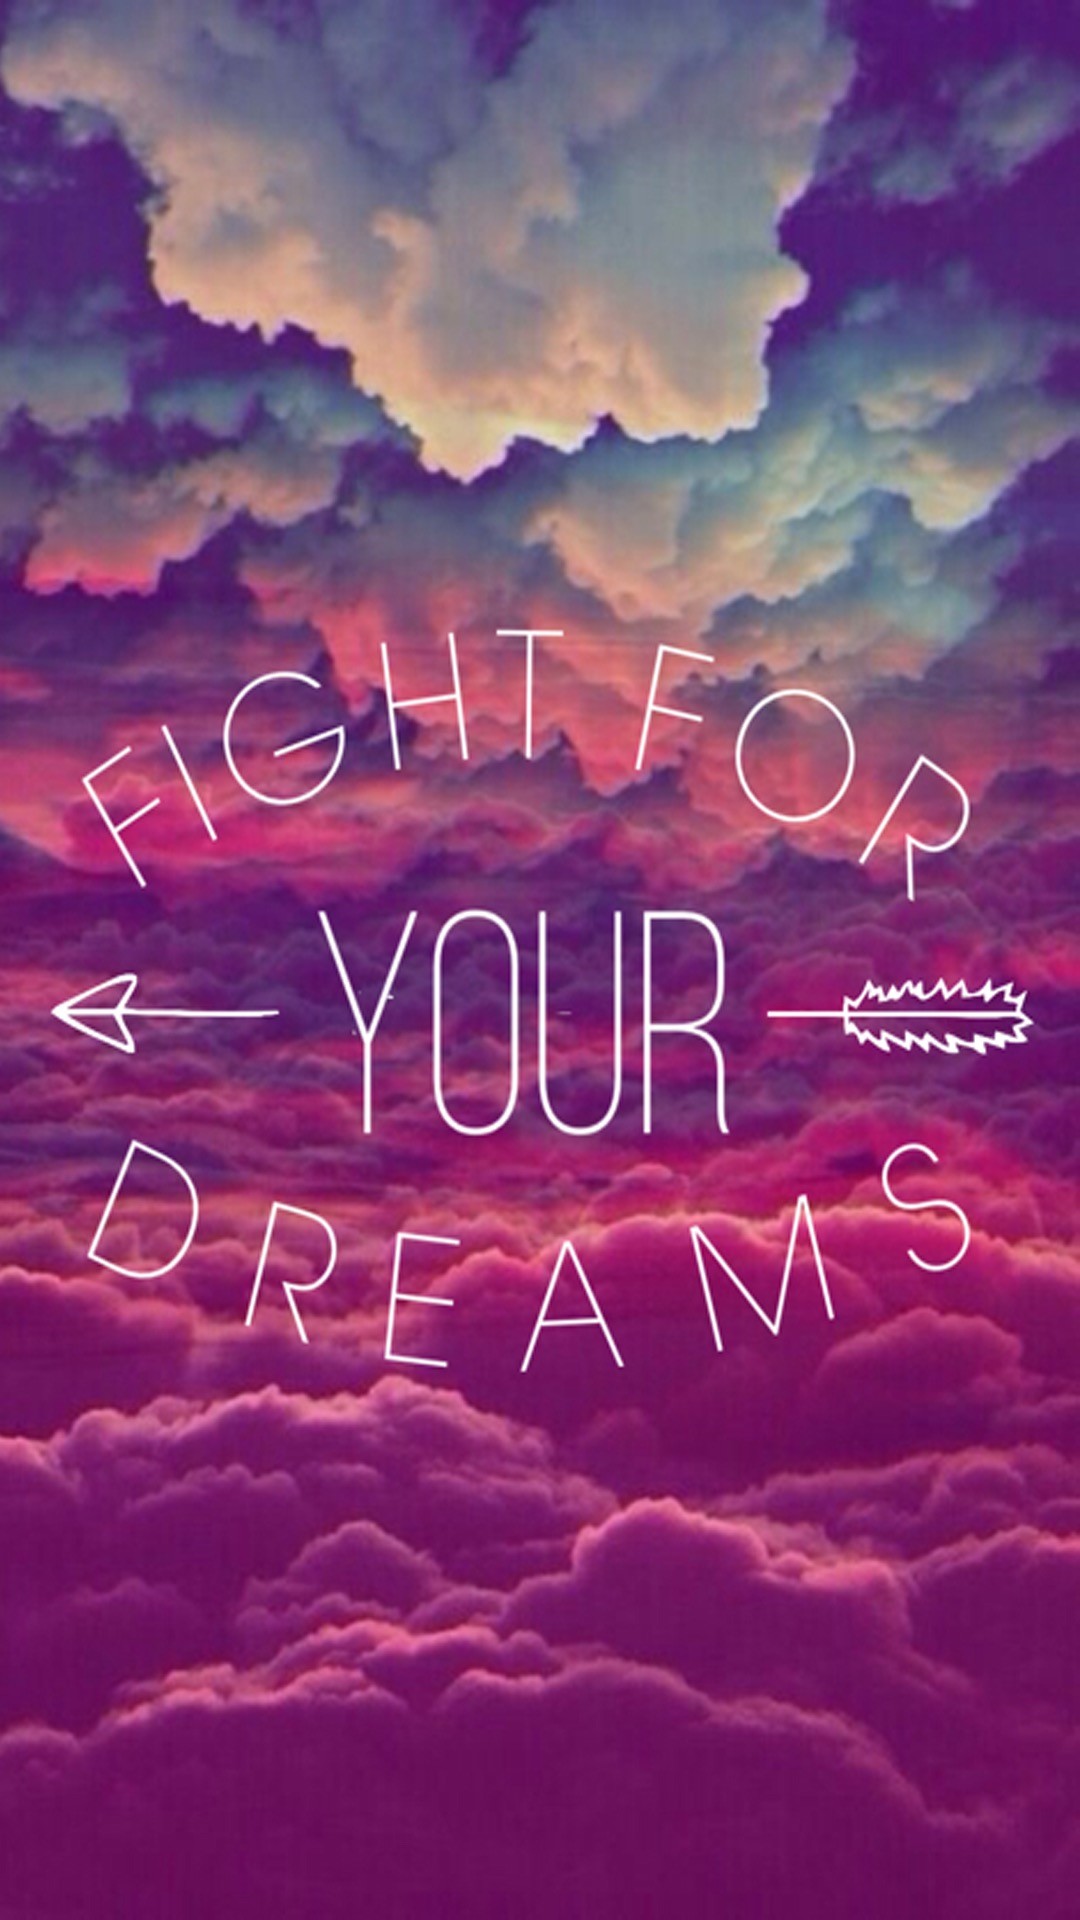 1080x1920 Fight for your dreams, not for everyone elseÂ´s